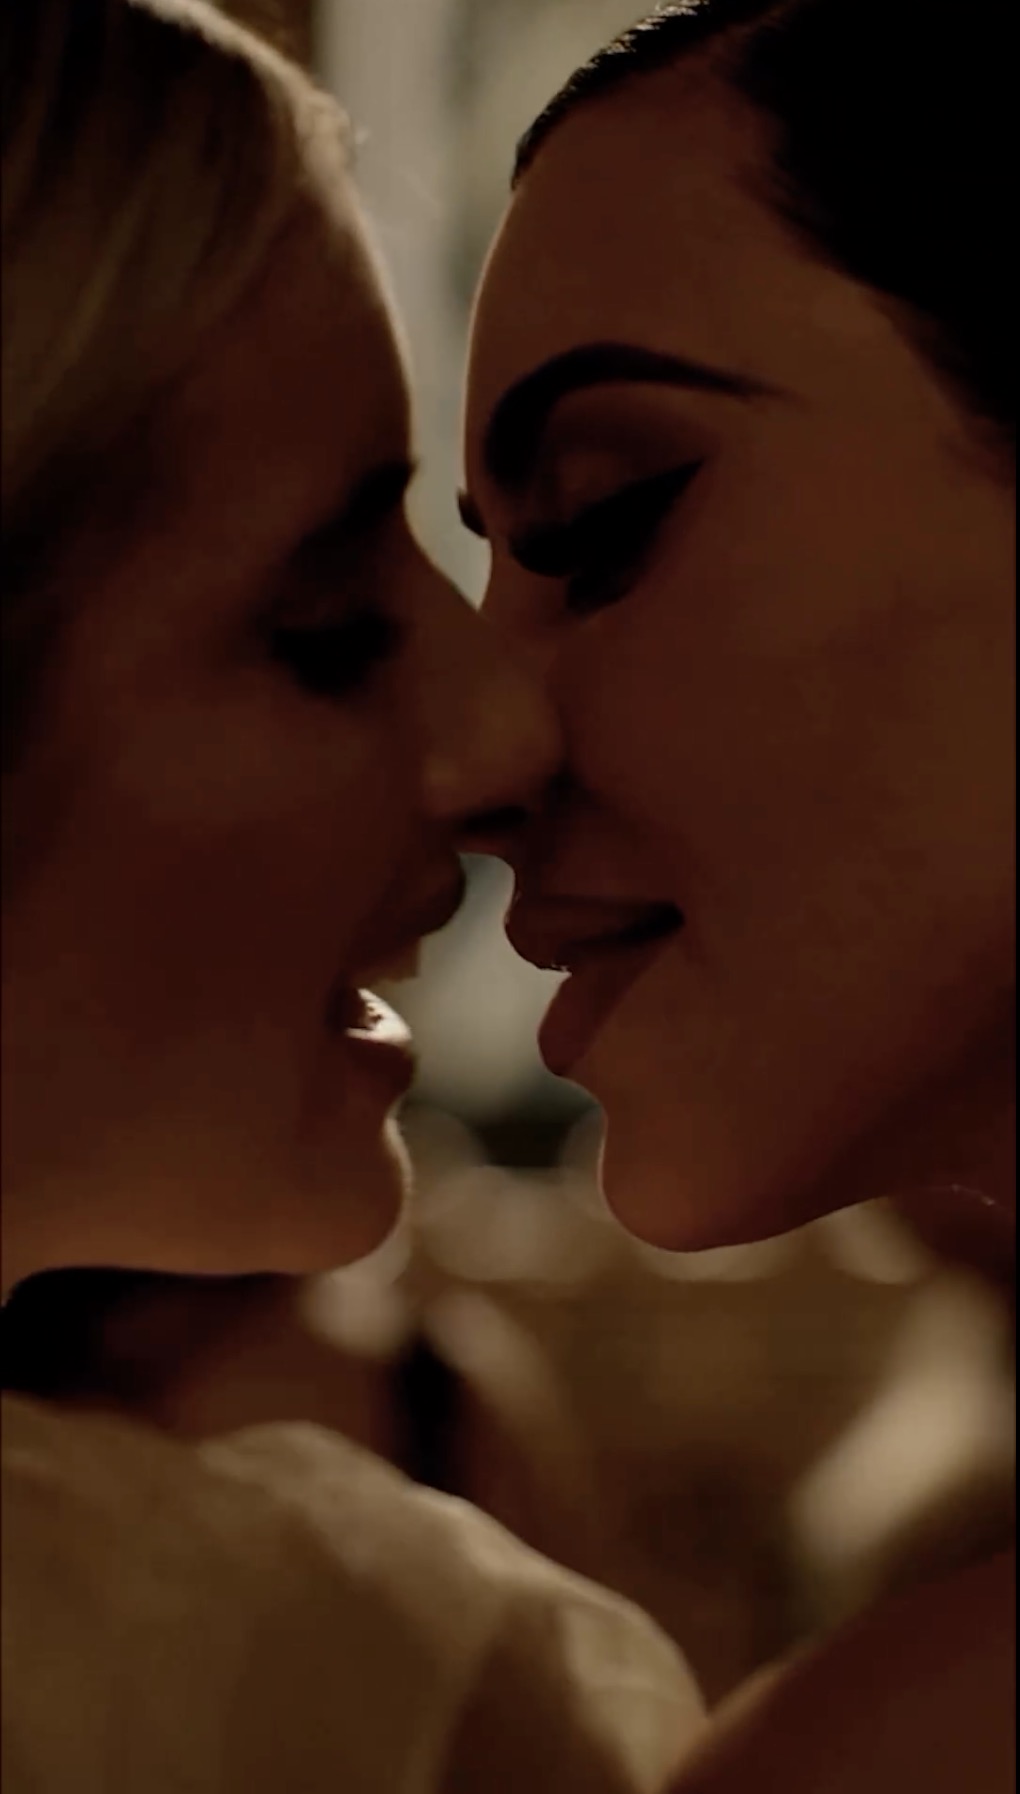 In the Part Two trailer, fans were shocked to see the two characters kiss